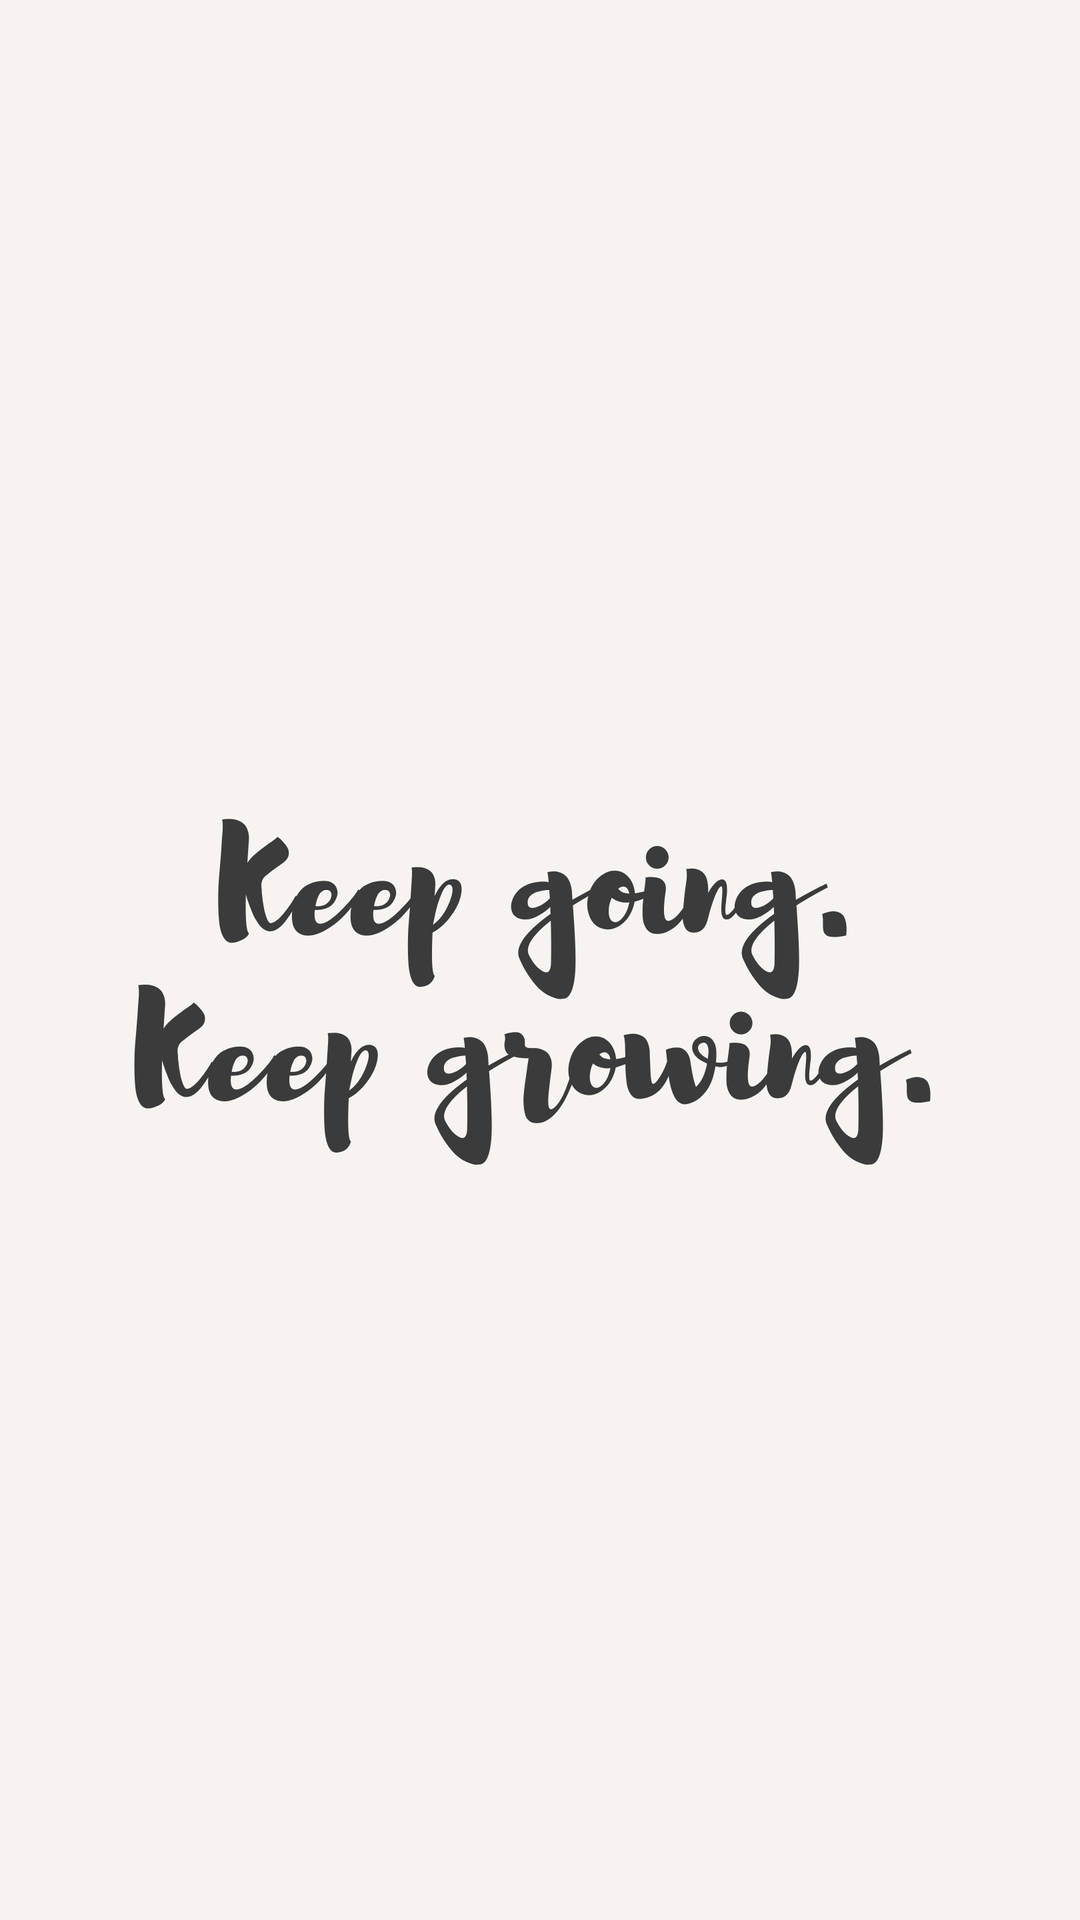 Motivational Quote Keep Going Wallpaper